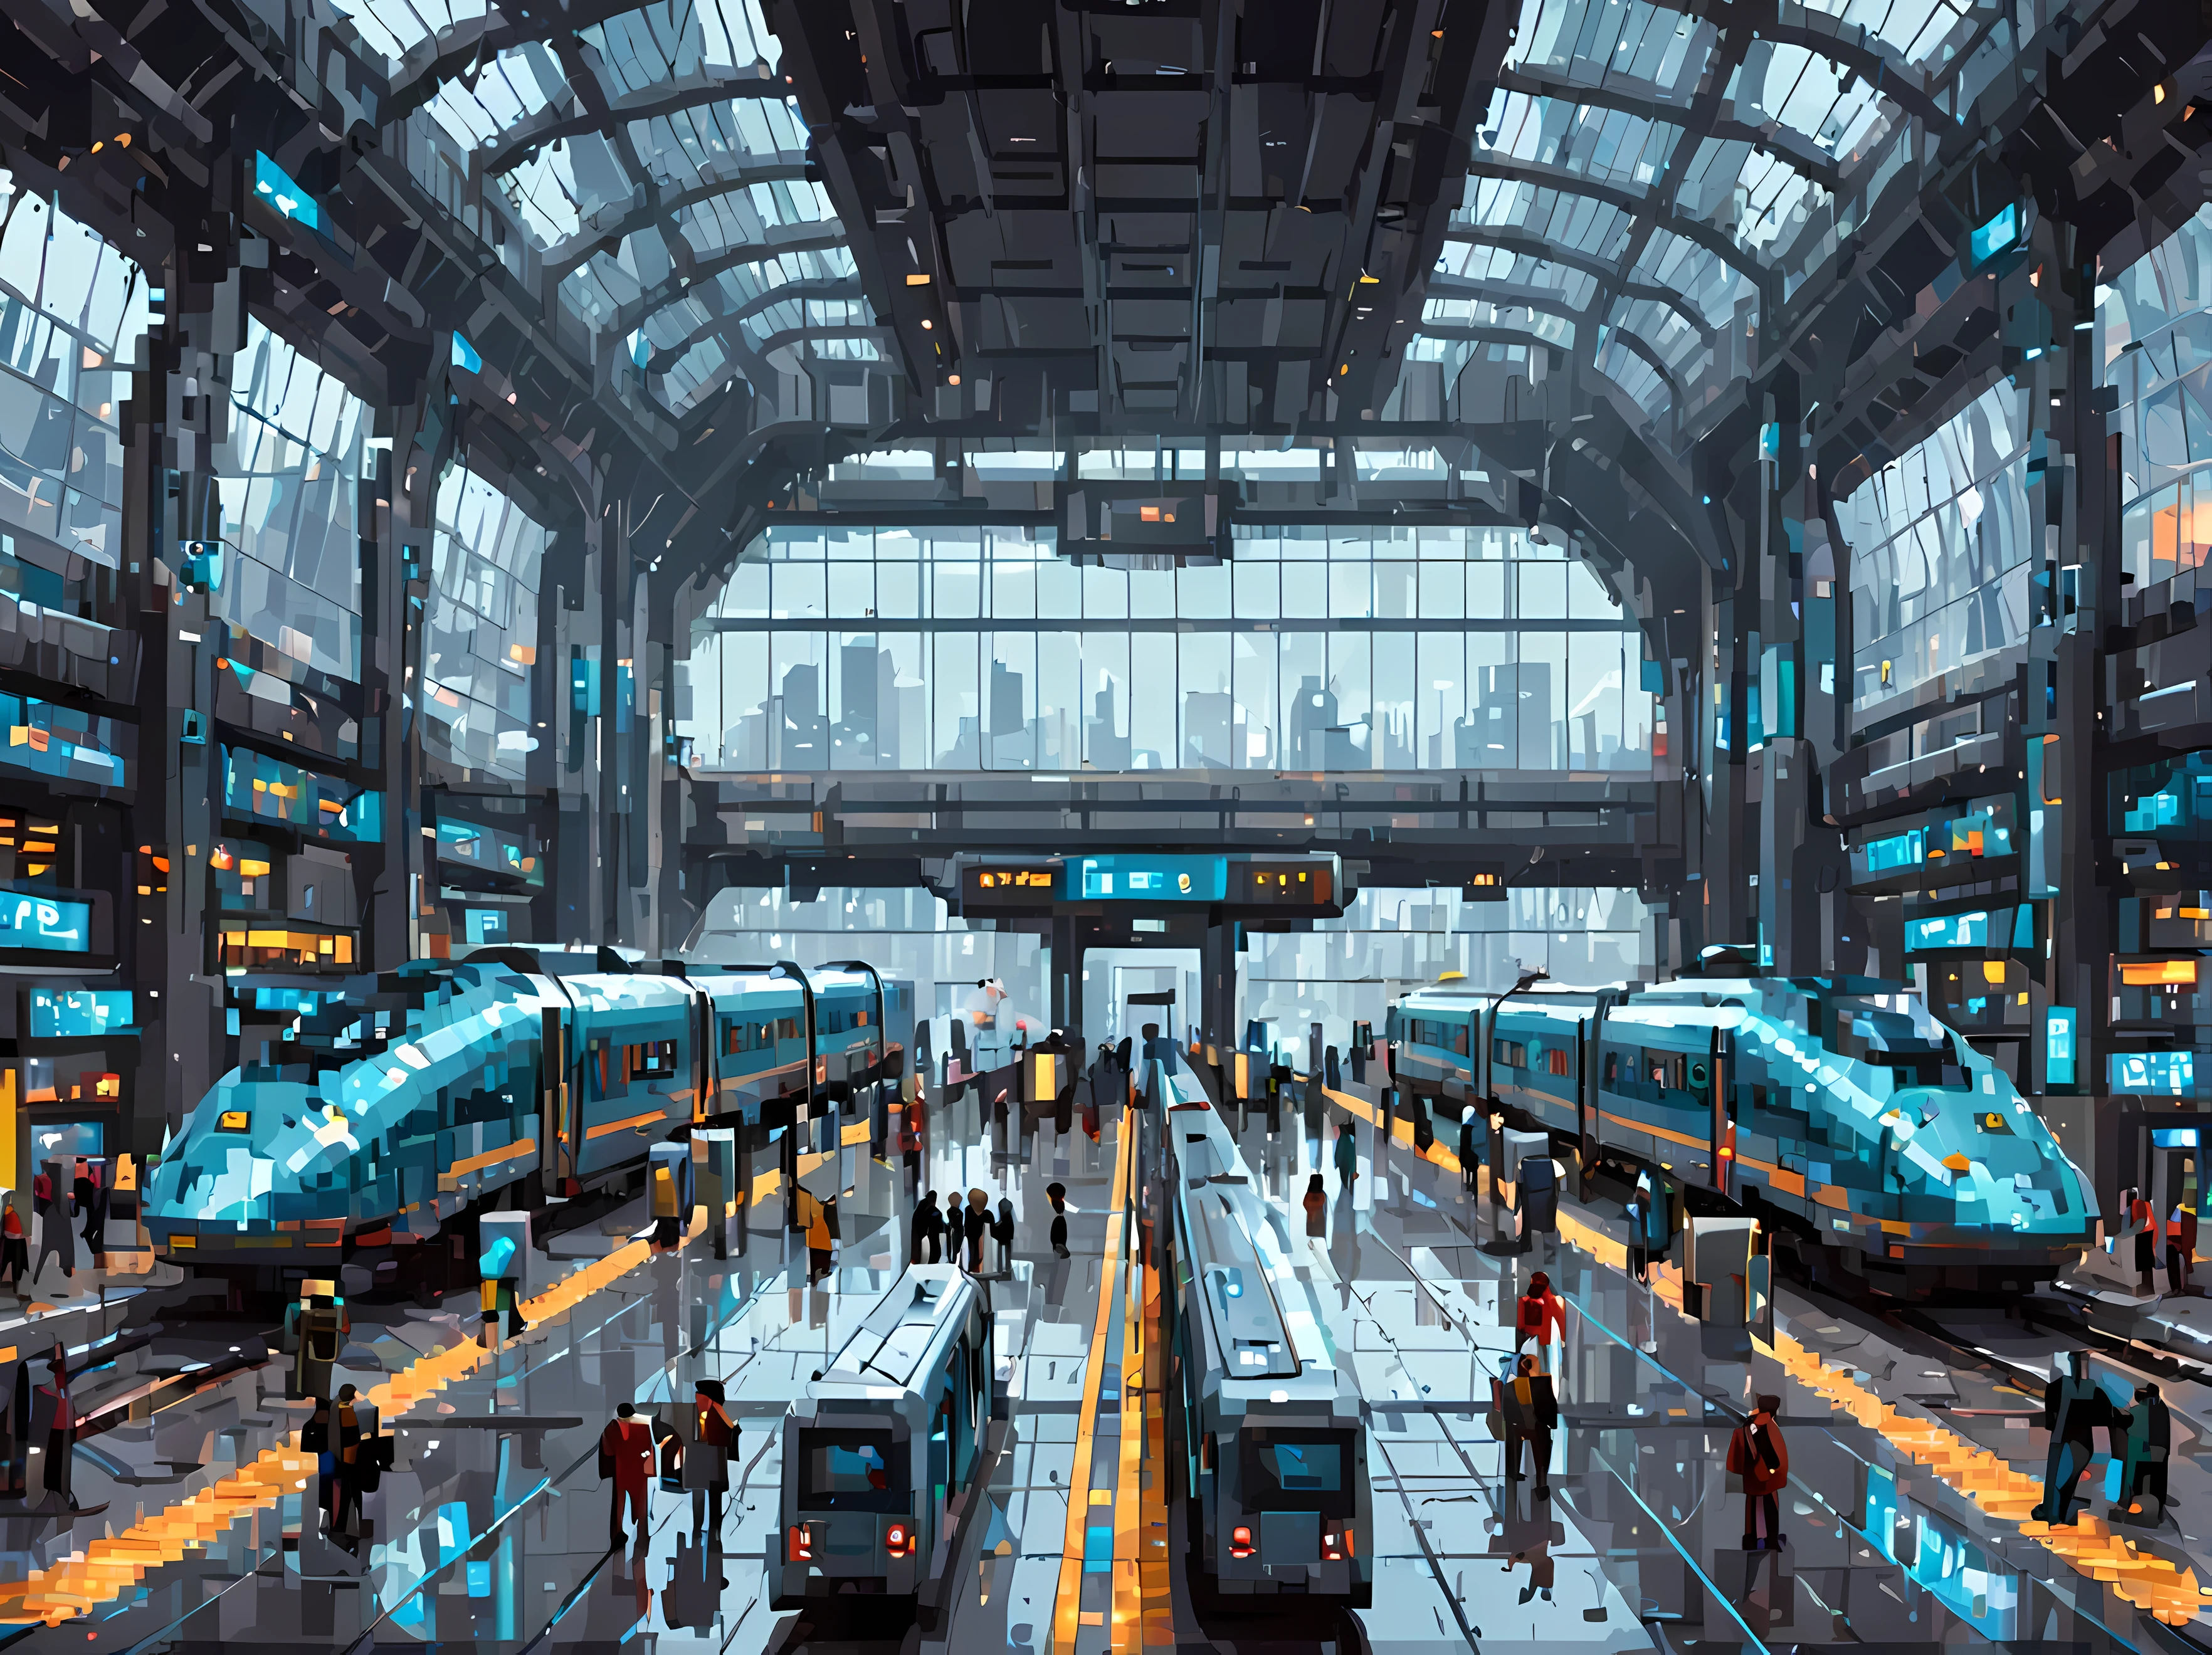 Pixel art, a captivating scene featuring a futuristic train station, sleek modern, architecture with transparent glass panels, a high-speed train, advanced technological elements like holographic displays and robotic assistants, a futuristic cityscape backdrop, cyberpunk passengers, masterpiece in maximum 16K resolution, superb quality. | ((More_Detail))